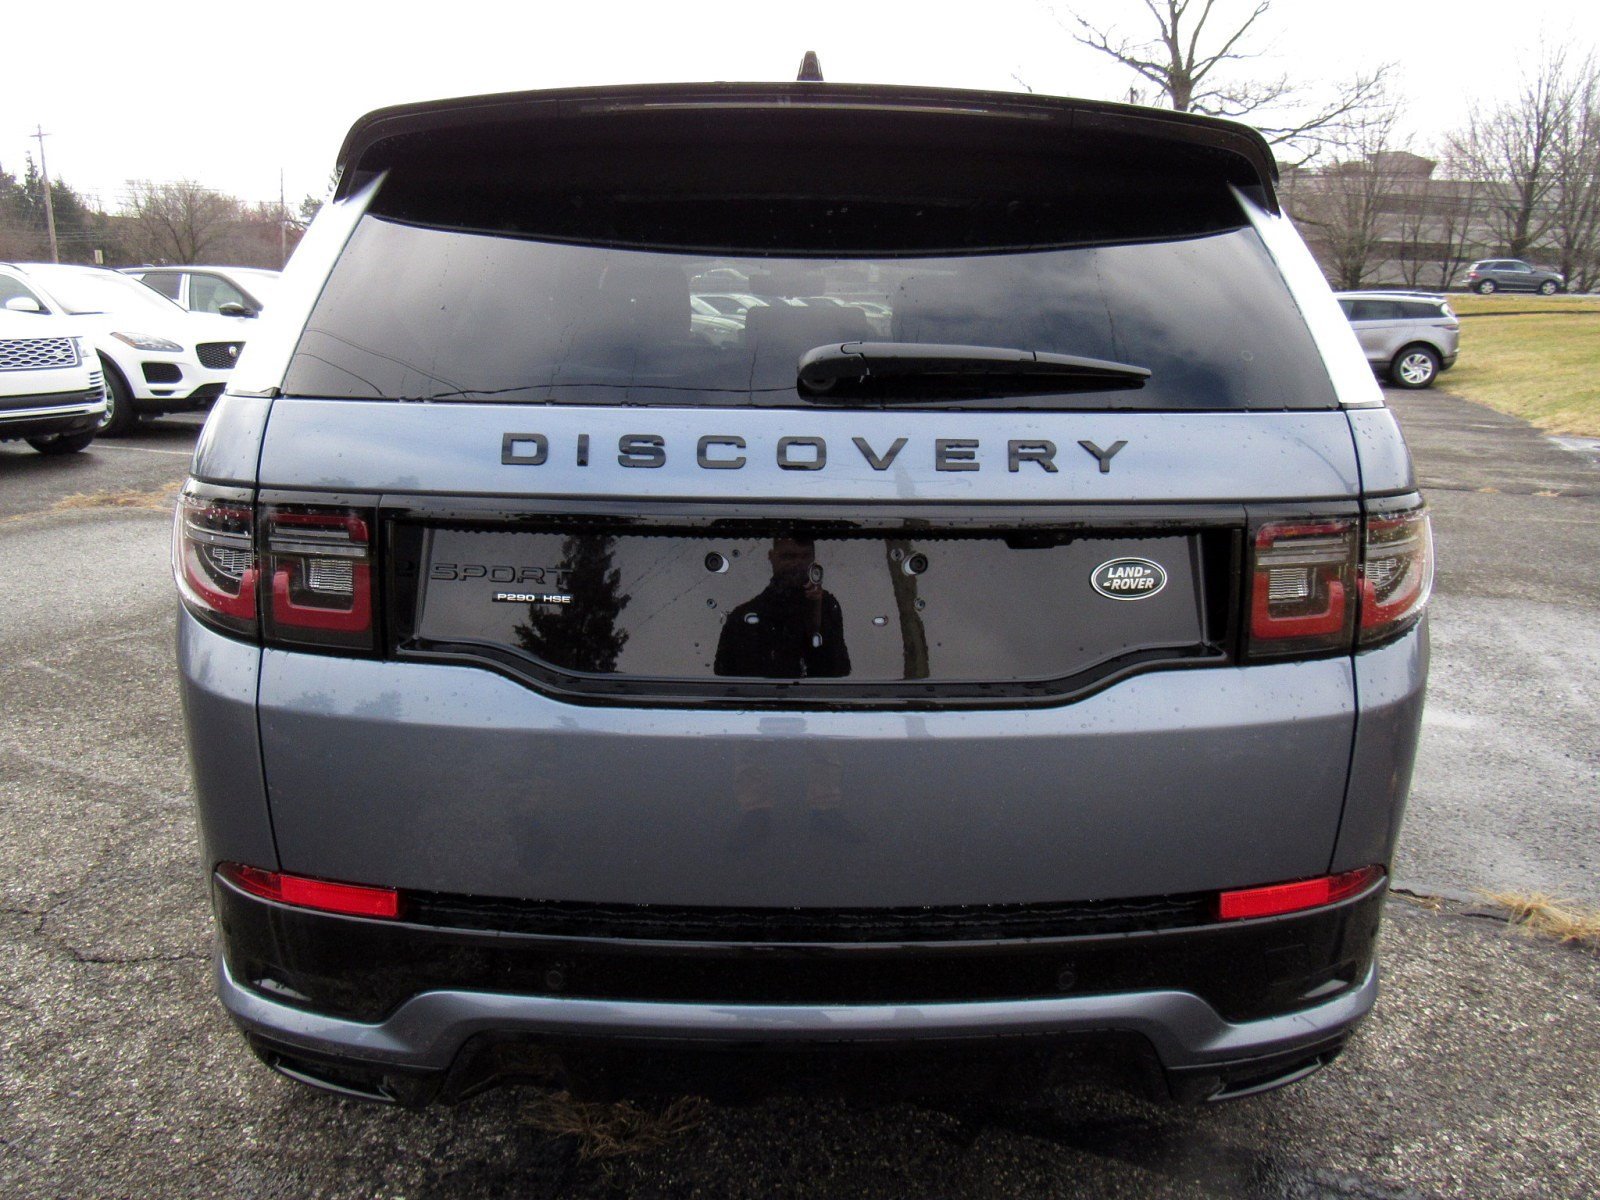 New 2020 Land Rover Discovery Sport HSE R-Dynamic 4 Door ...